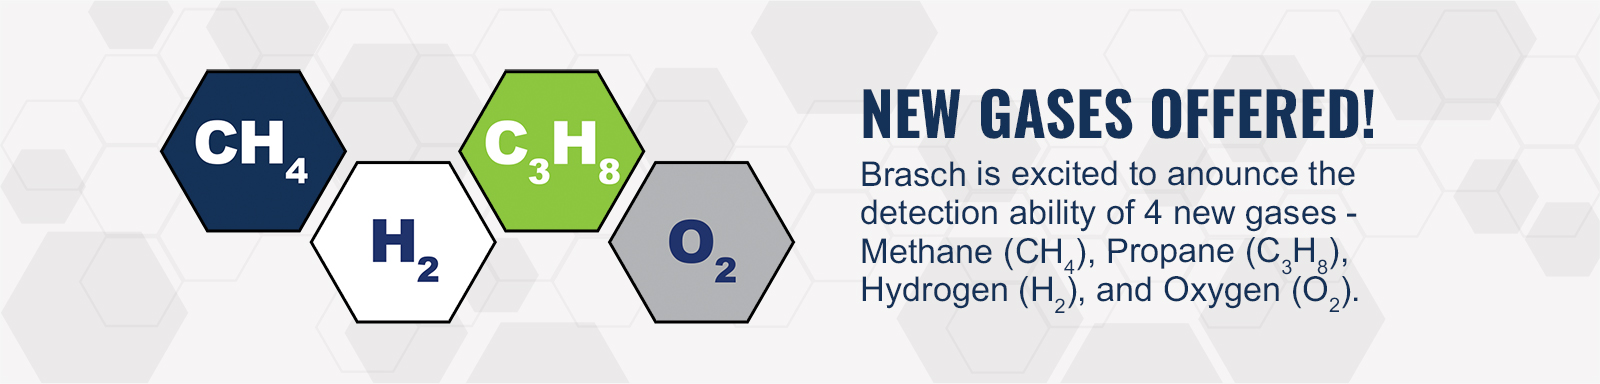 NEW GASES OFFERED! Brasch is excited to anounce the detection ability of 4 new gases - Methane (CH4), Propane (C3H8), Hydrogen (H2), and Oxygen (O2).